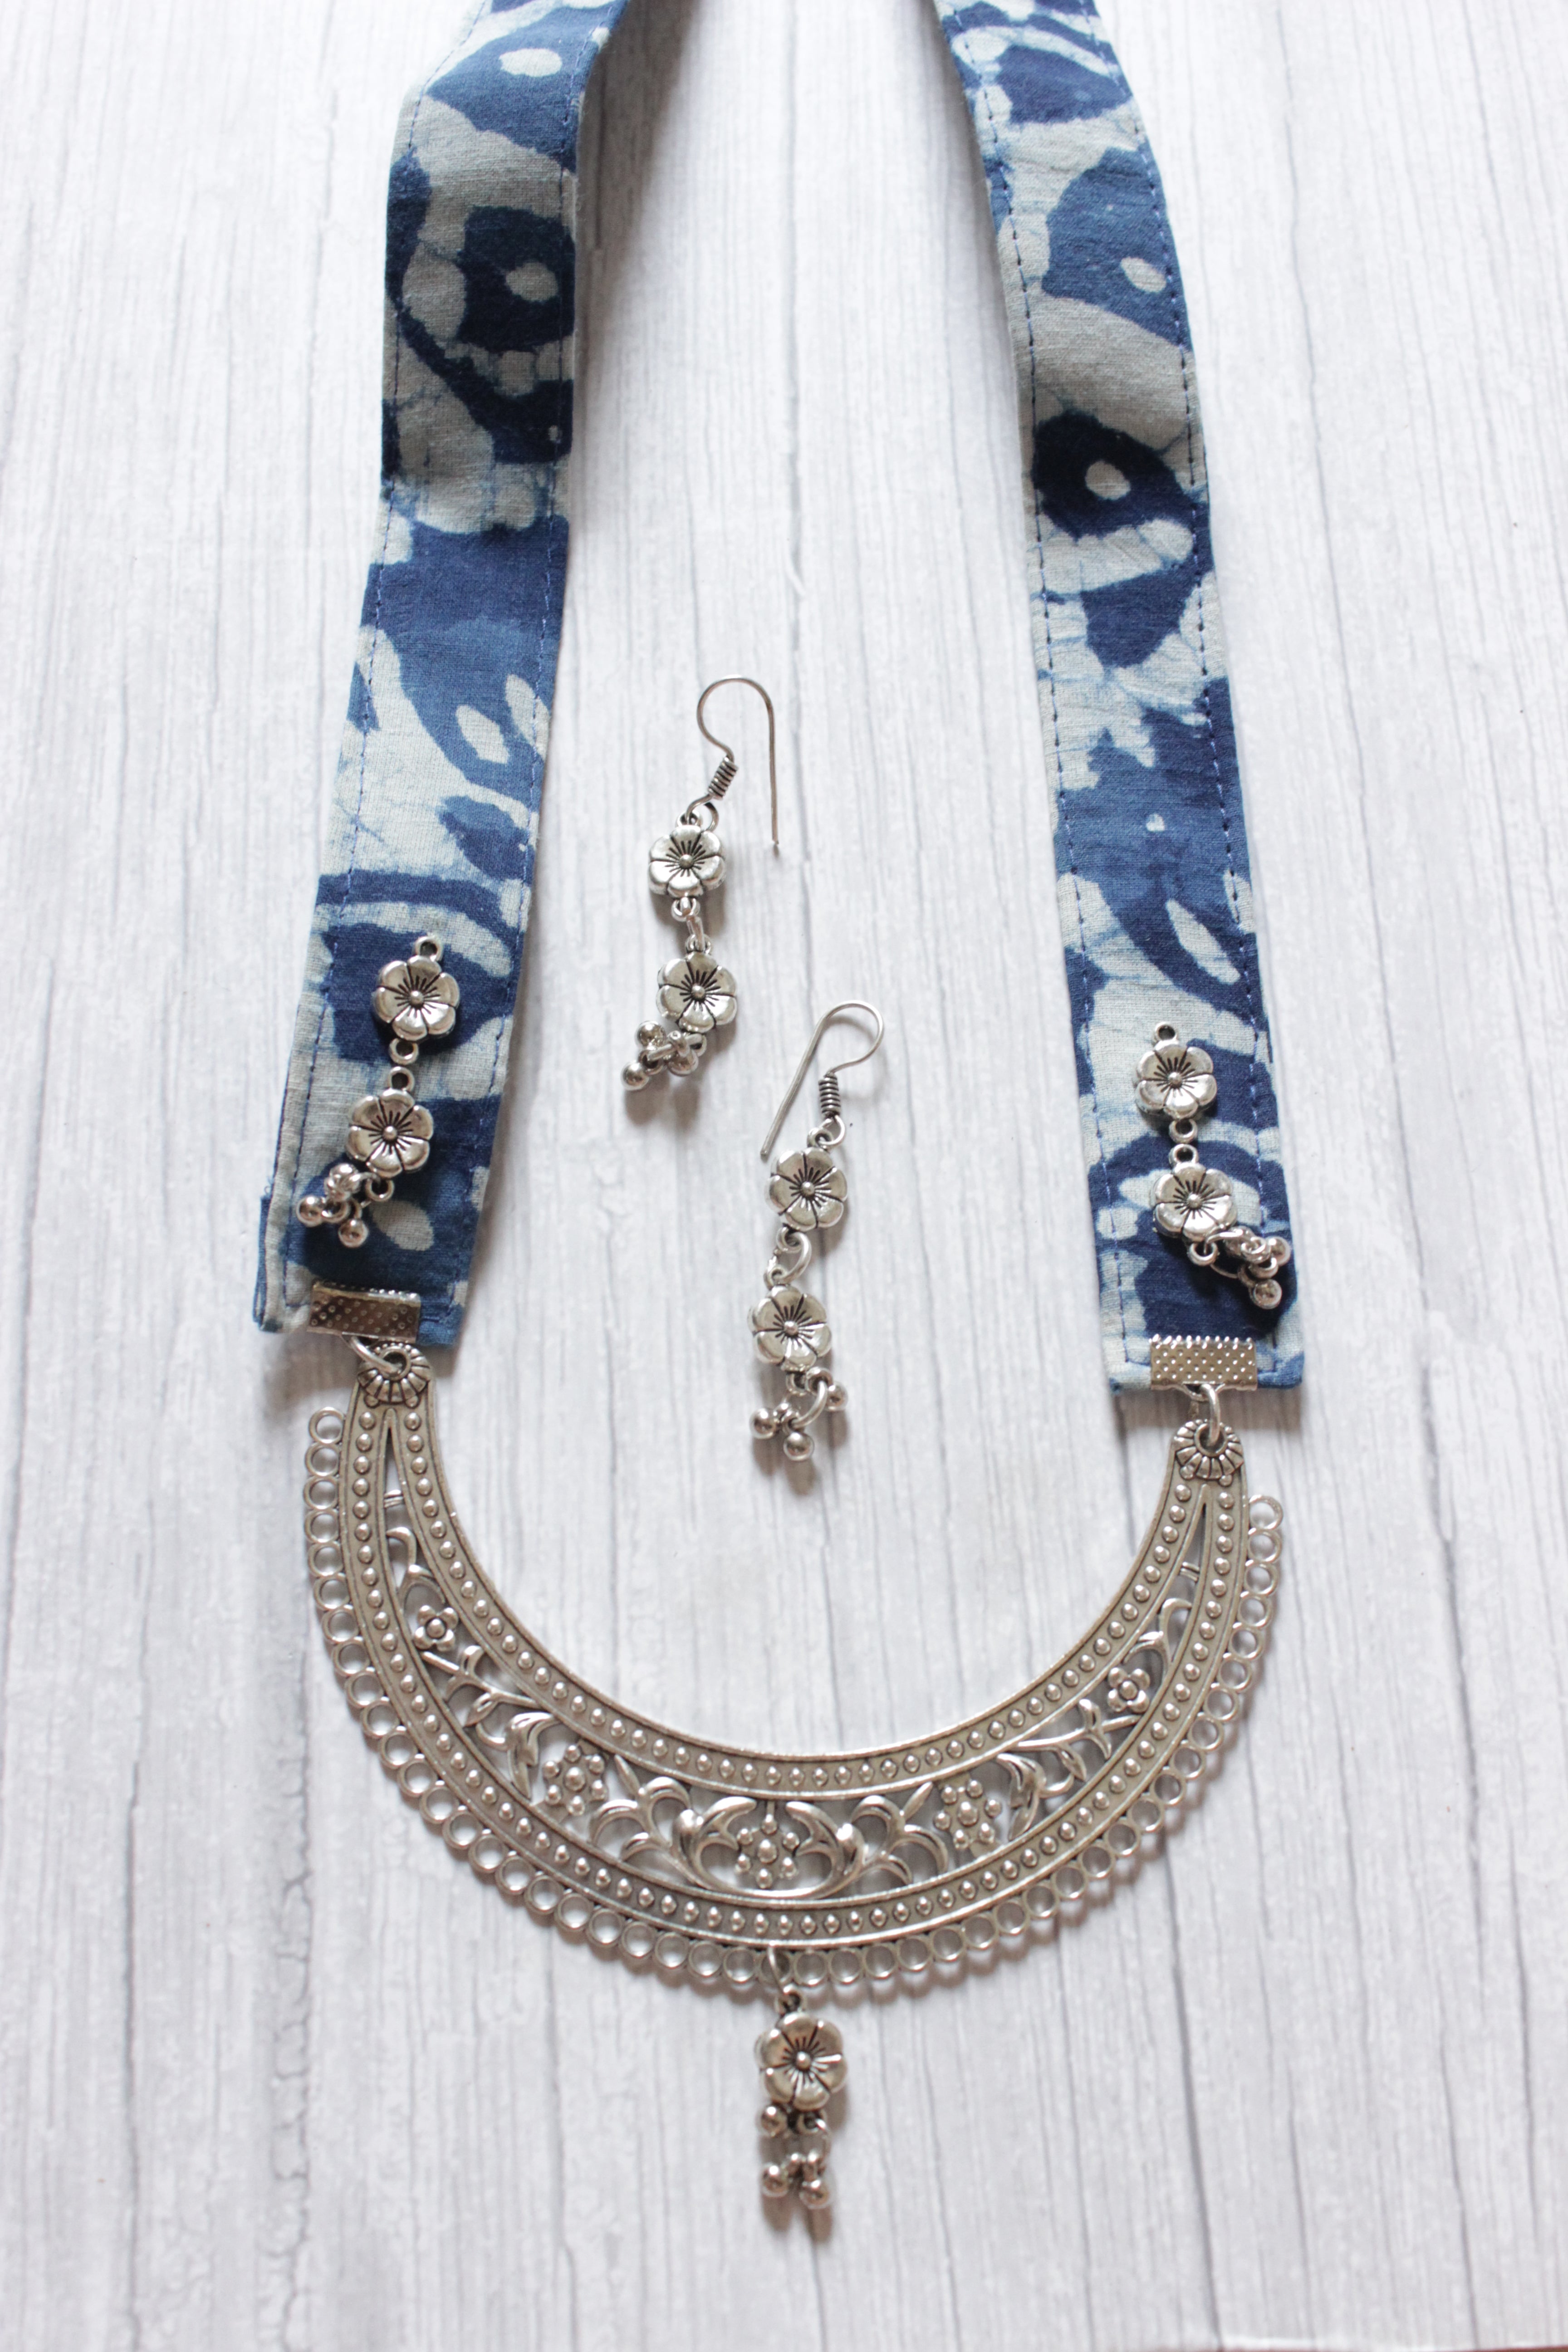 Crescent Moon Shaped Statement Pendant Collar Necklace with Indigo Fabric